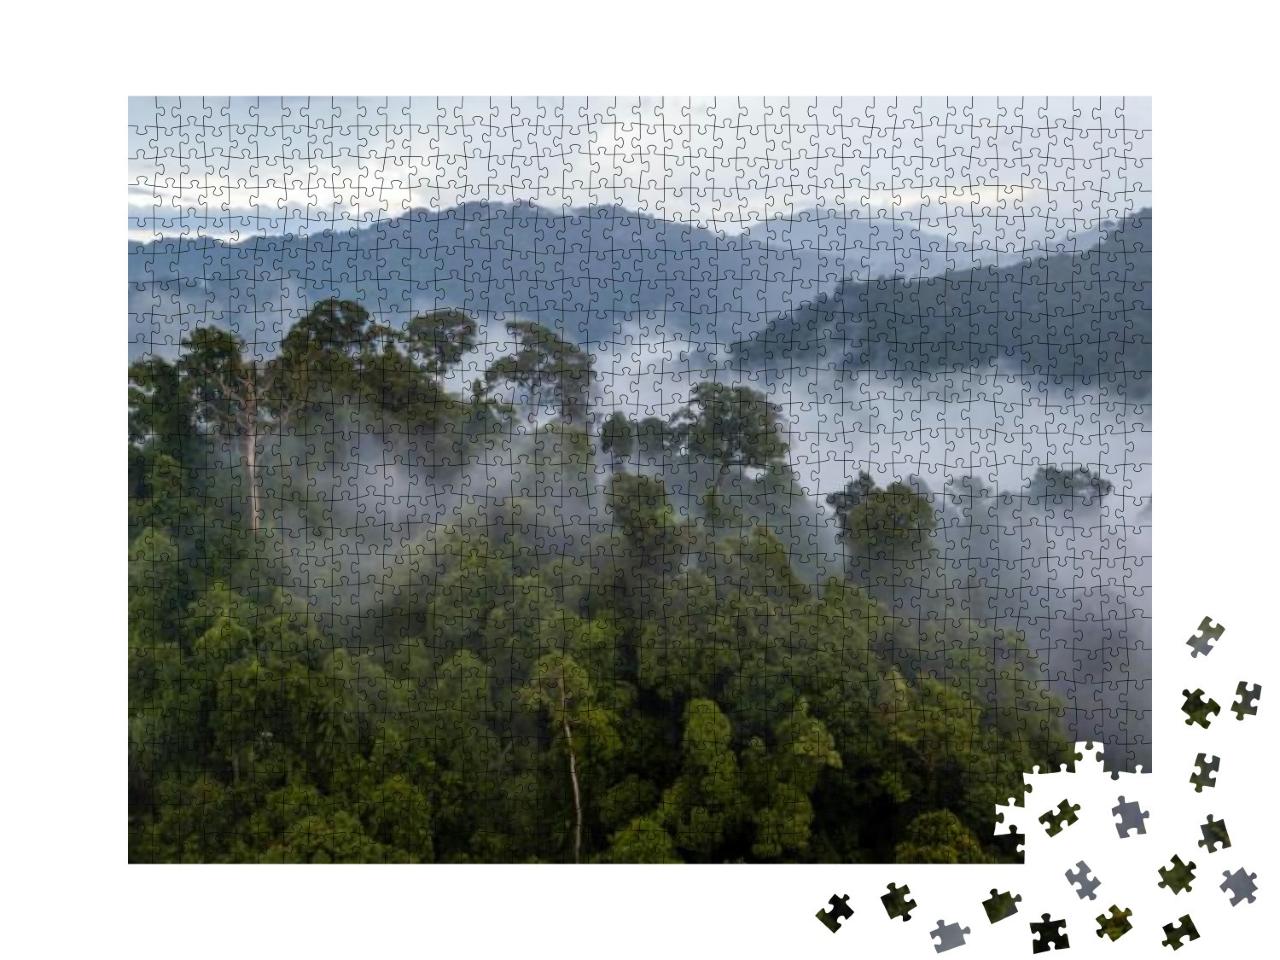 Aerial View of Mist, Cloud & Fog Hanging Over a Lush Trop... Jigsaw Puzzle with 1000 pieces